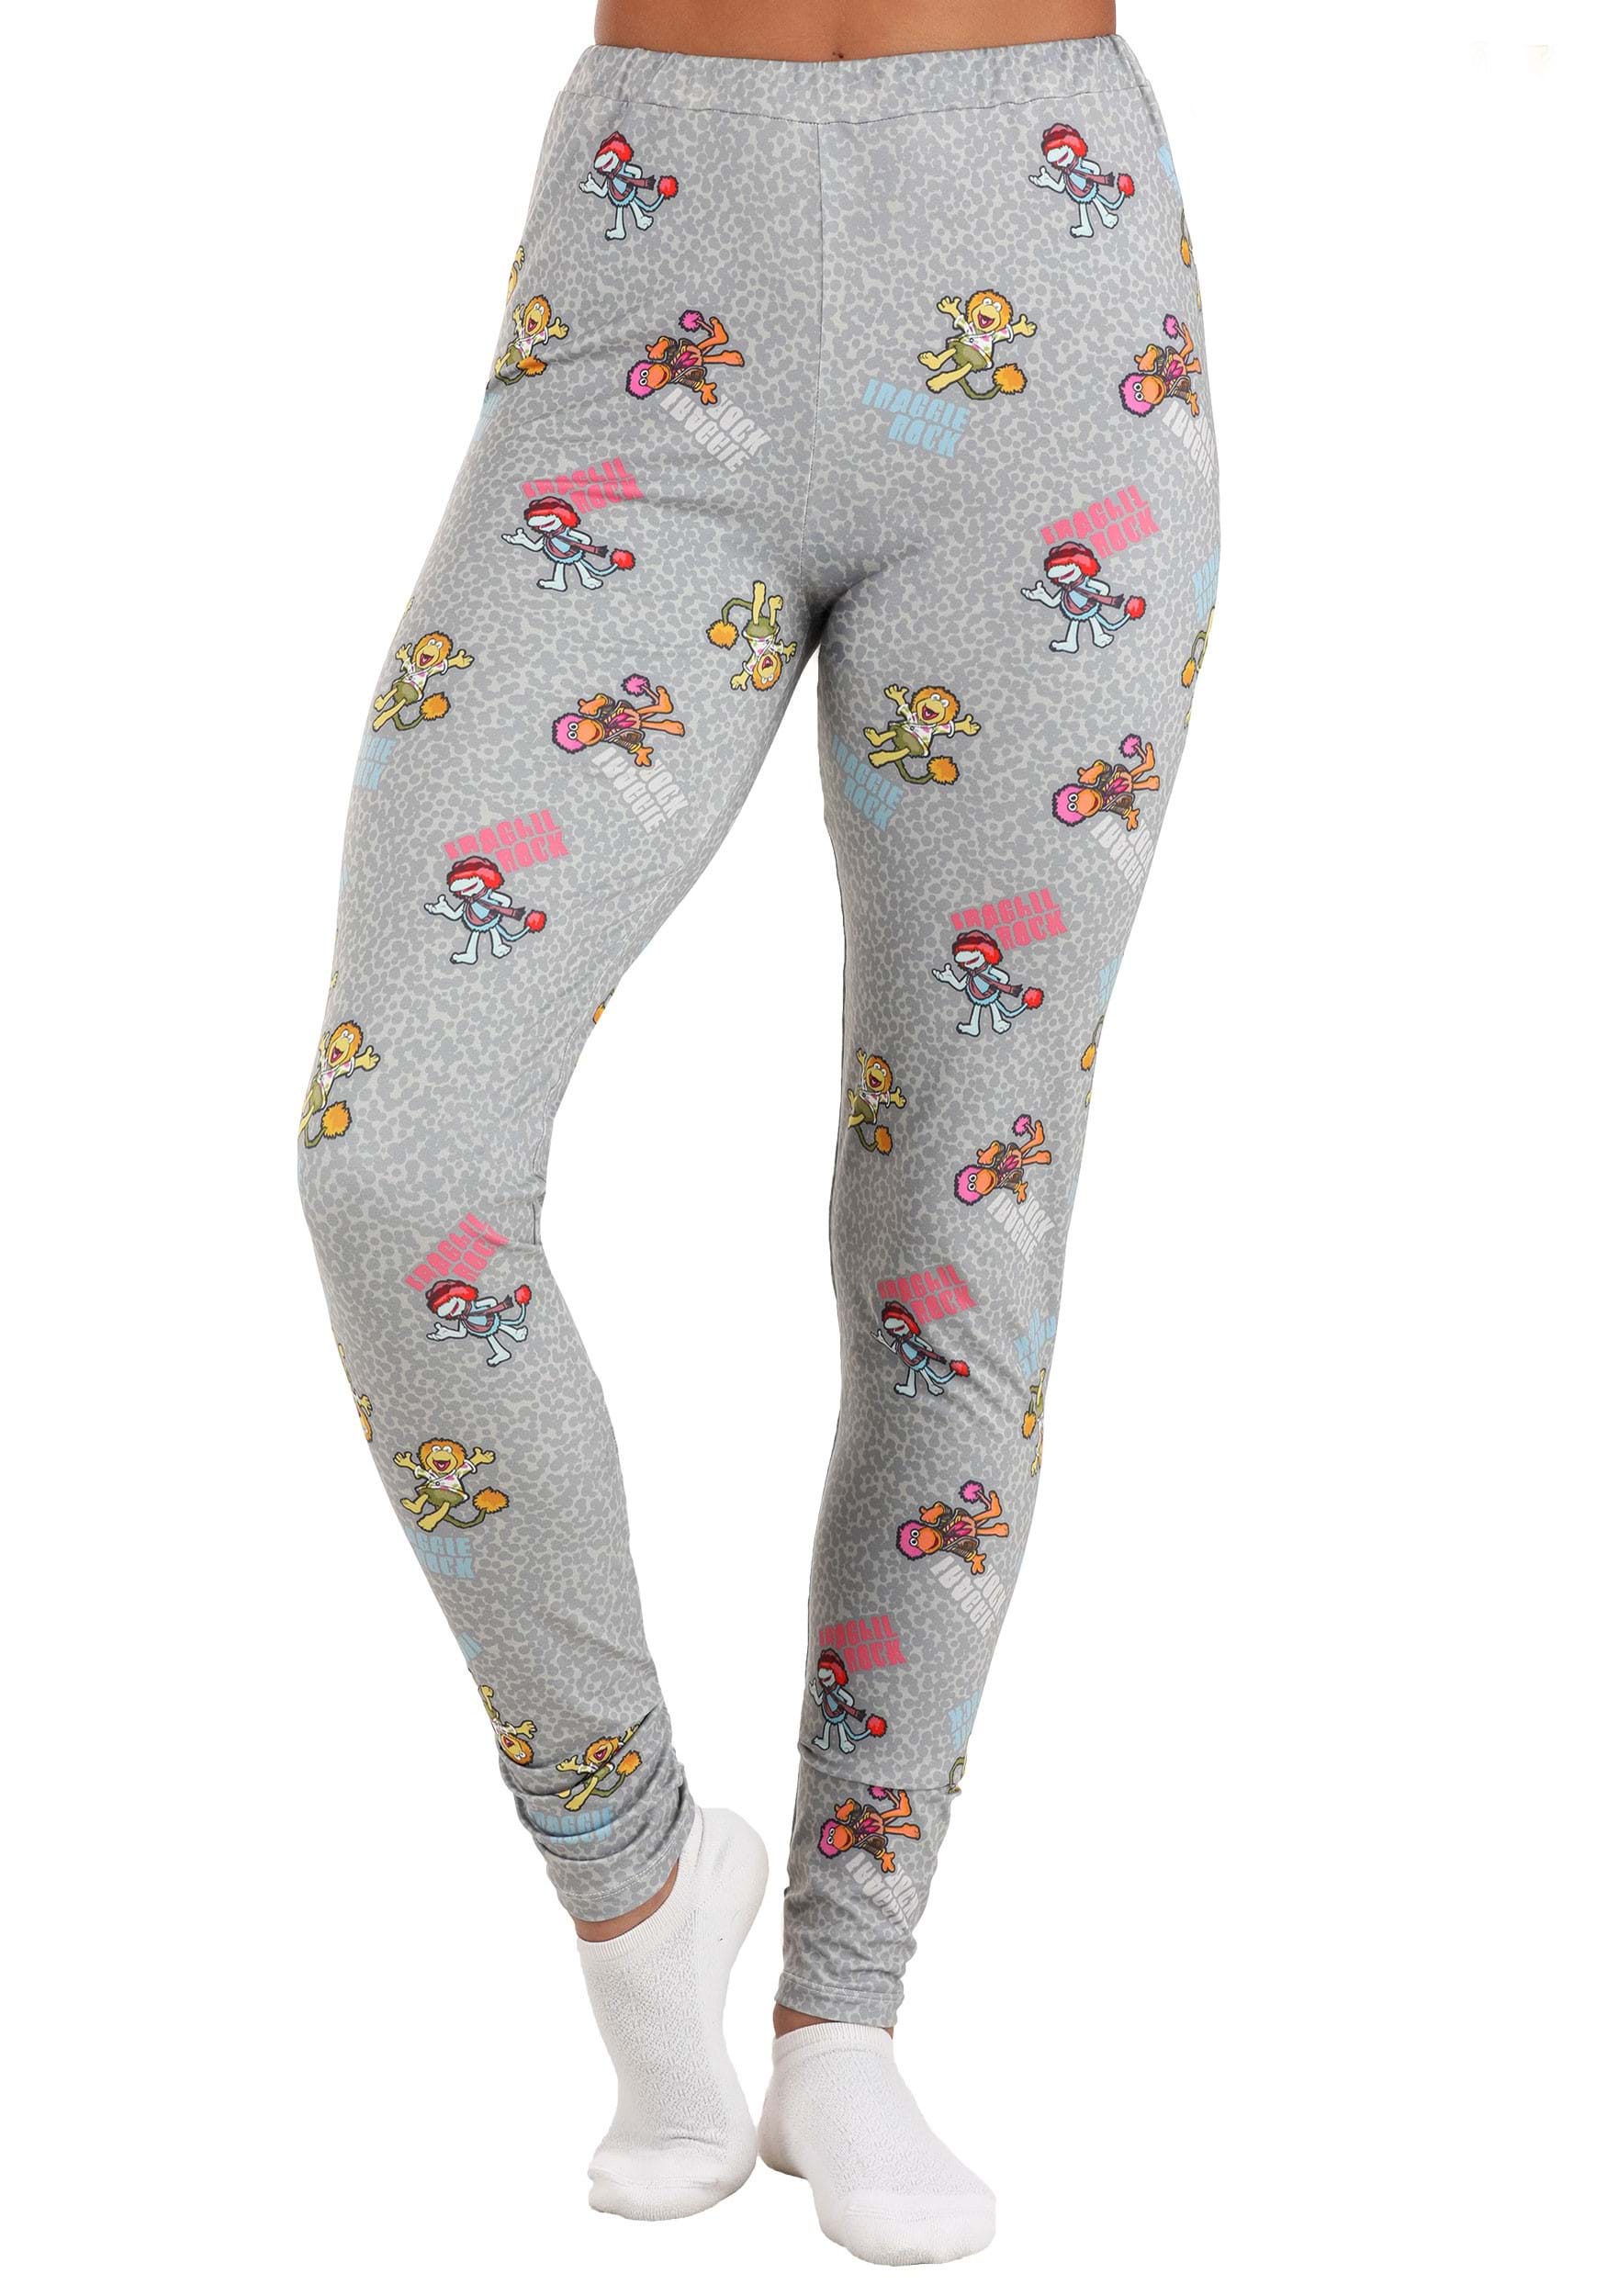 Fraggle Rock Leggings for Adults